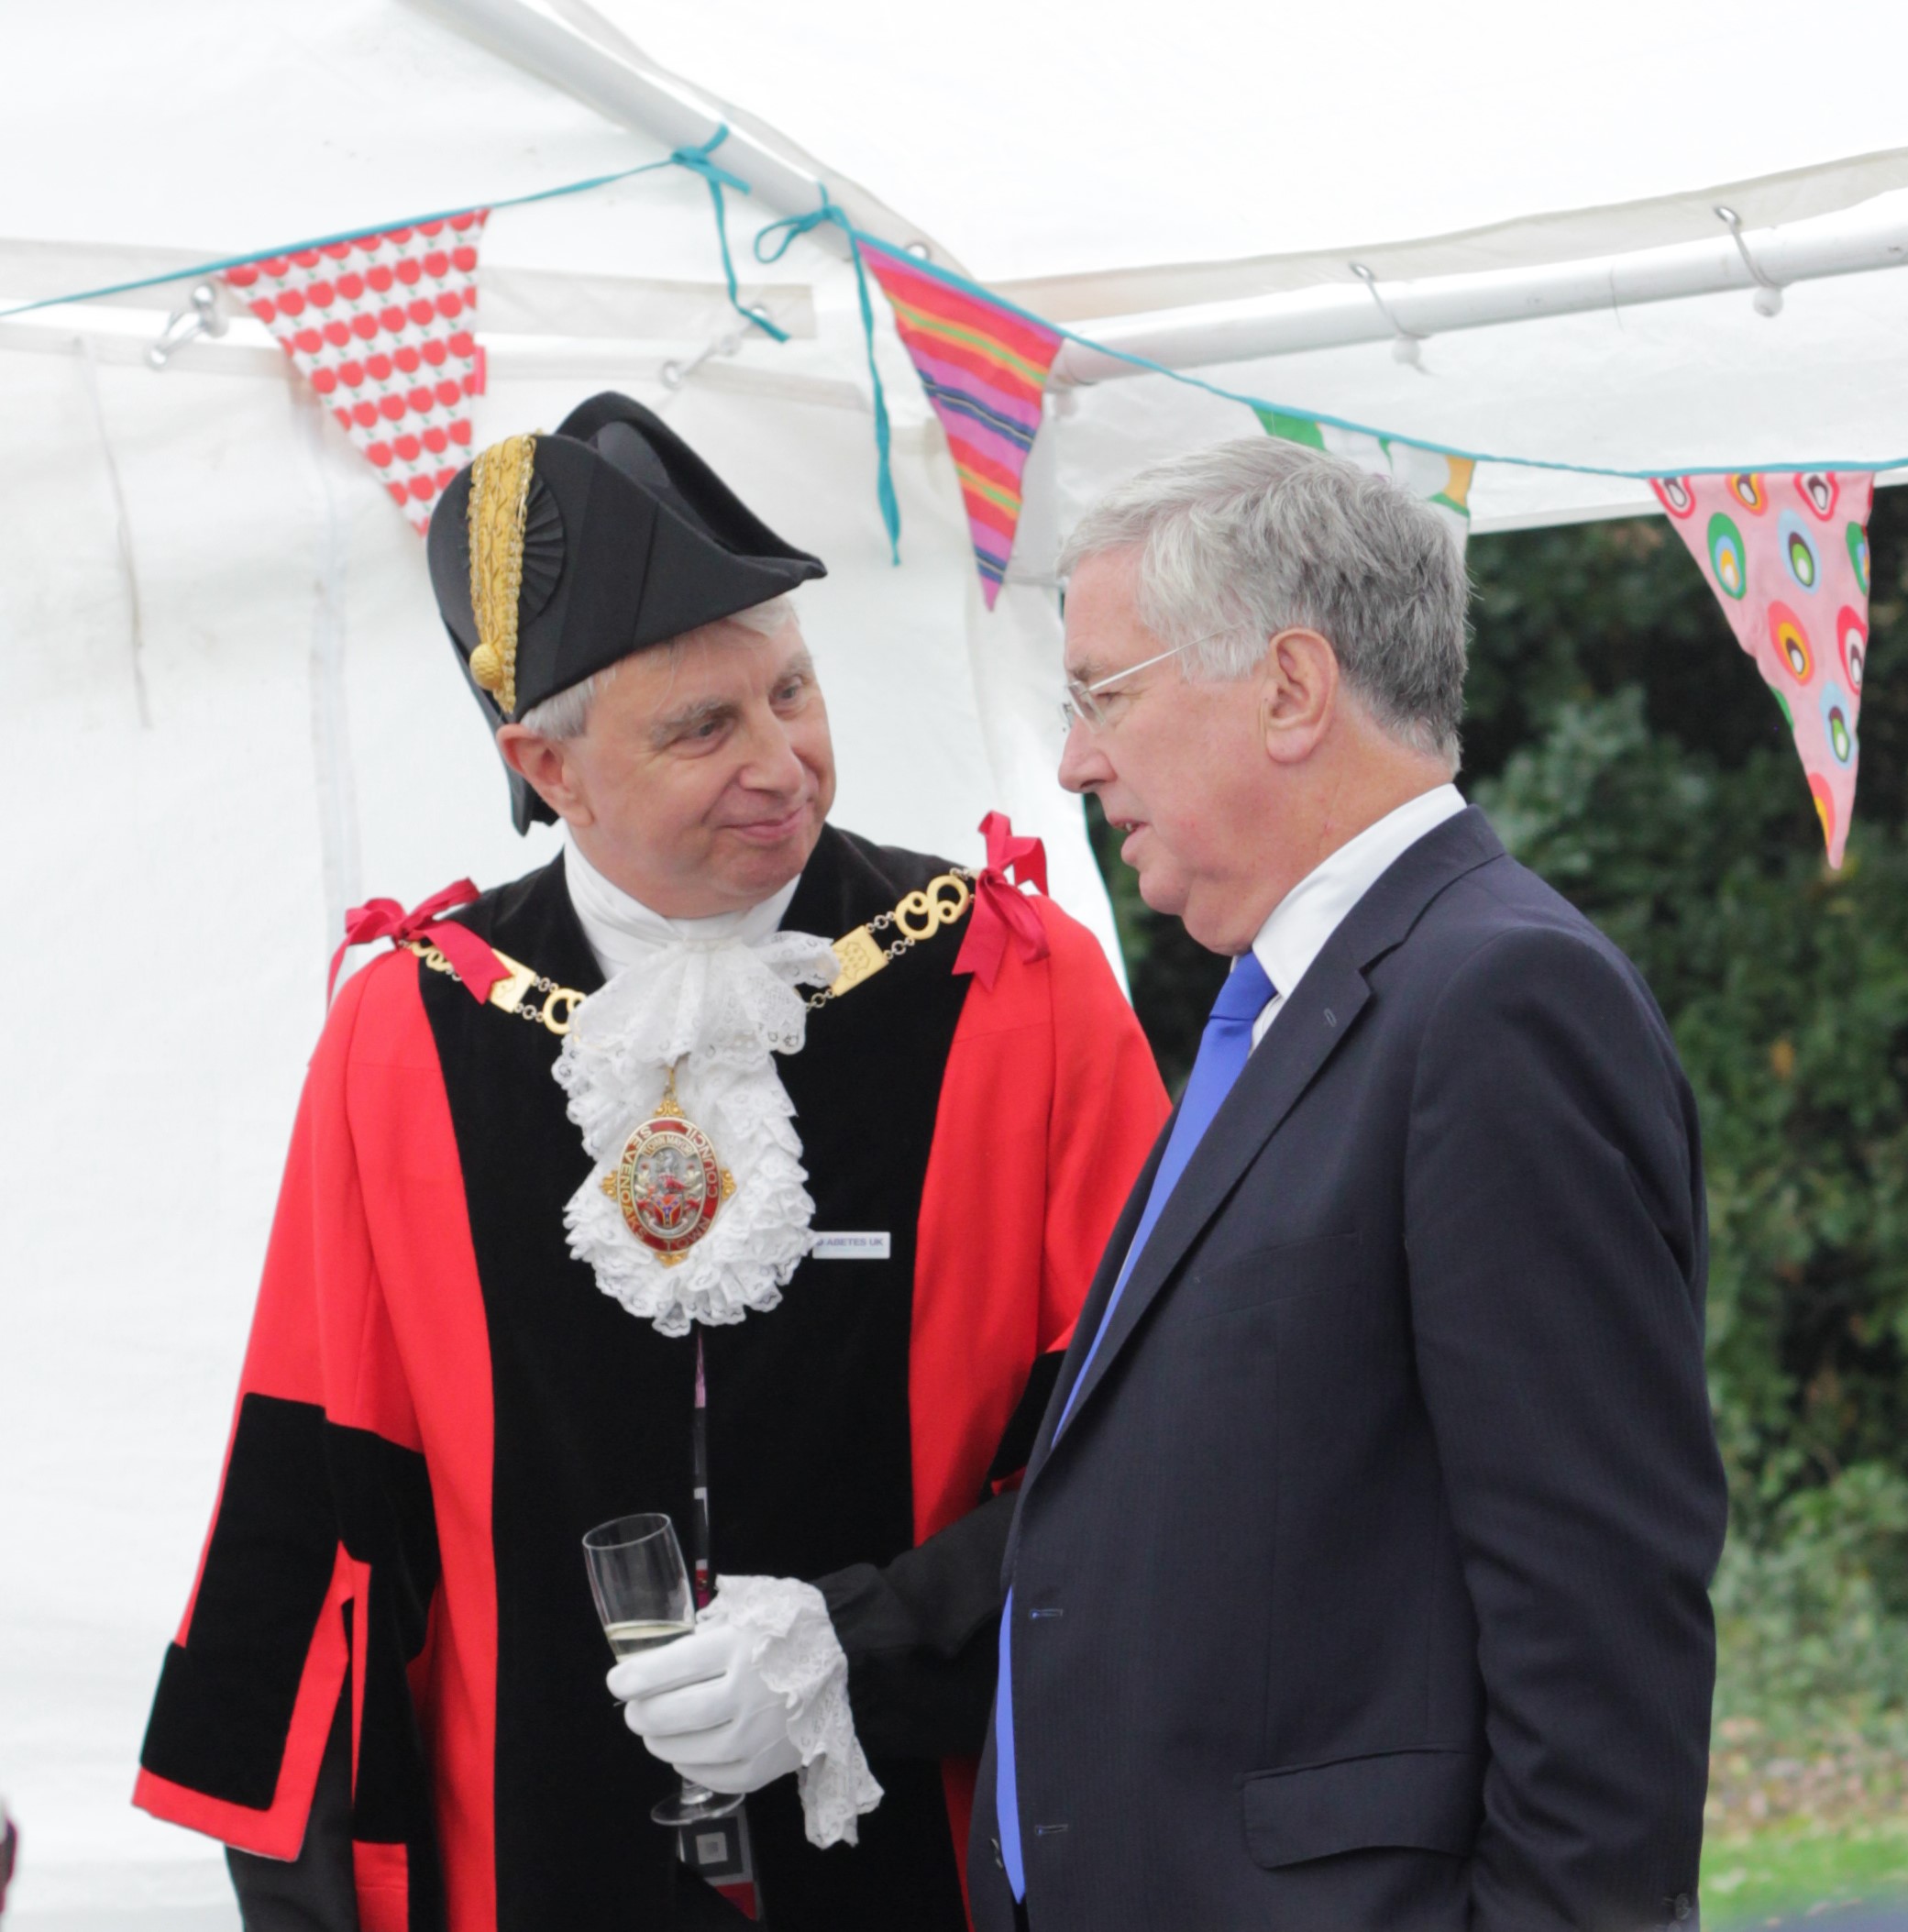 Michael with Cllr Andrew Eyre, Mayor of Sevenoaks, at the opening.